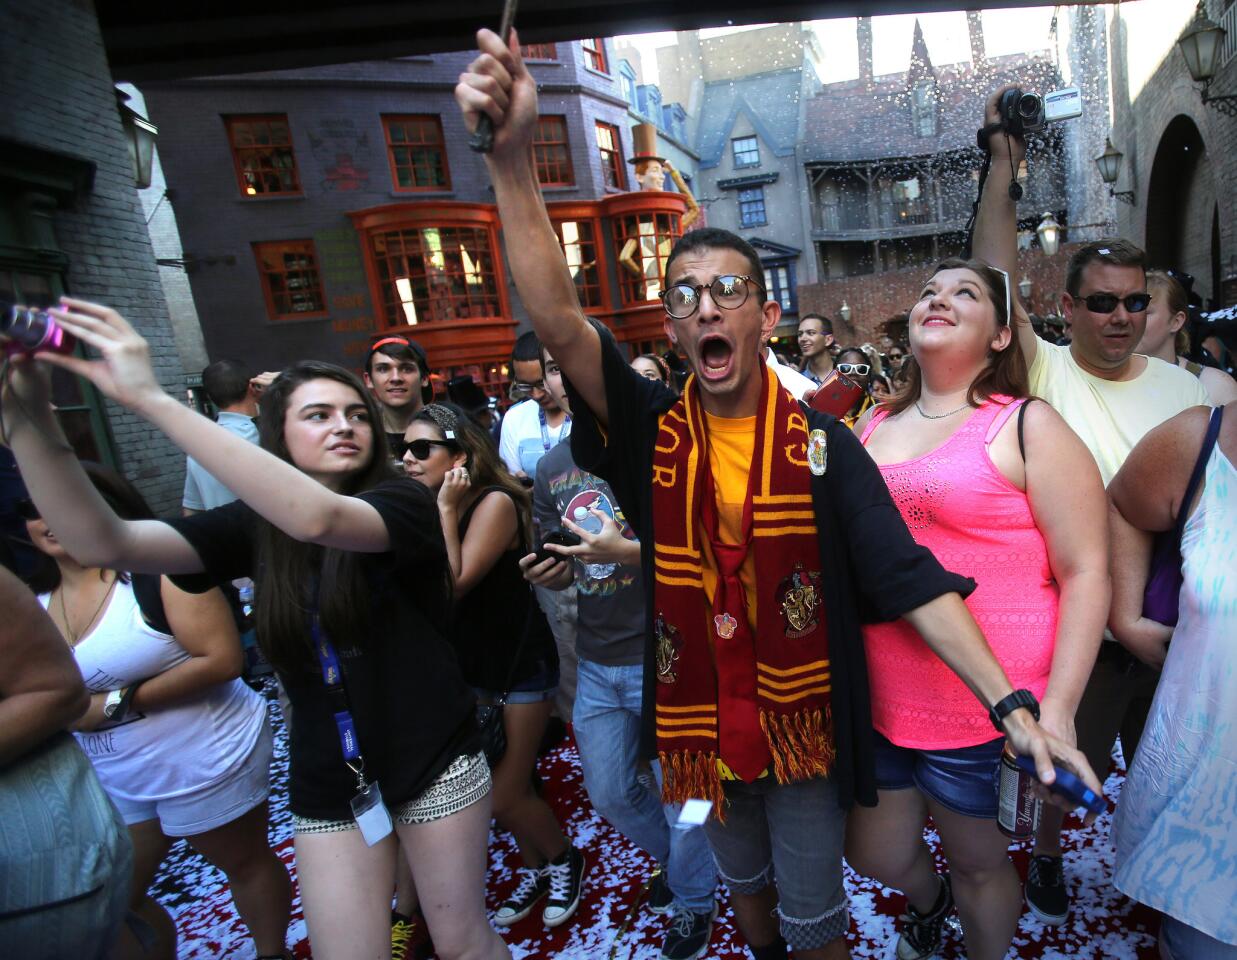 DIAGON ALLEY GRAND OPENING